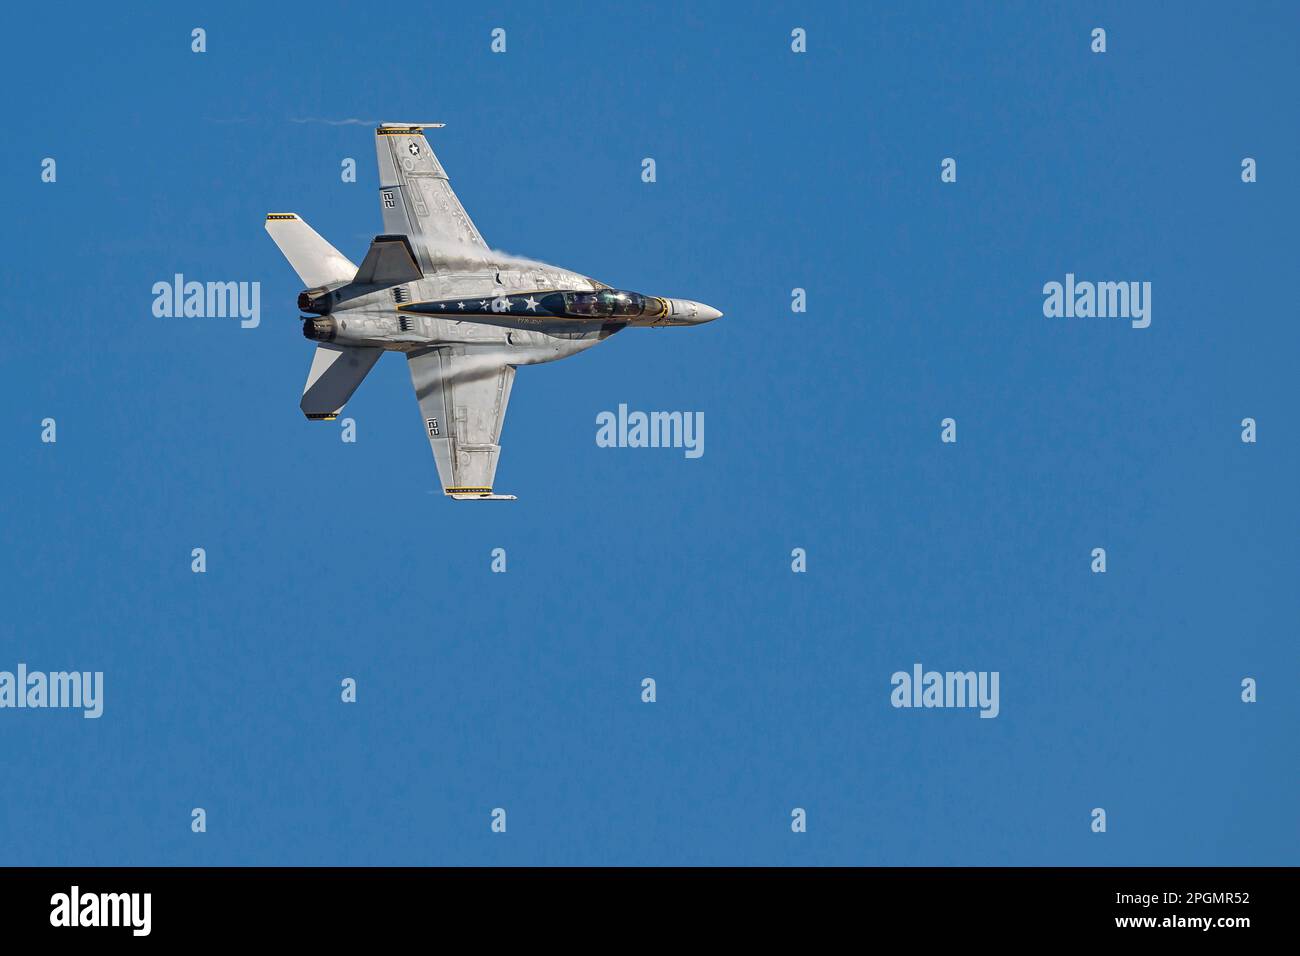 Las Vegas, NV - November 6, 2022: Navy F-18 Super Hornet Fighter Jet Does a Demo during the Aviation Nation airshow at Nellis AFB. Stock Photo